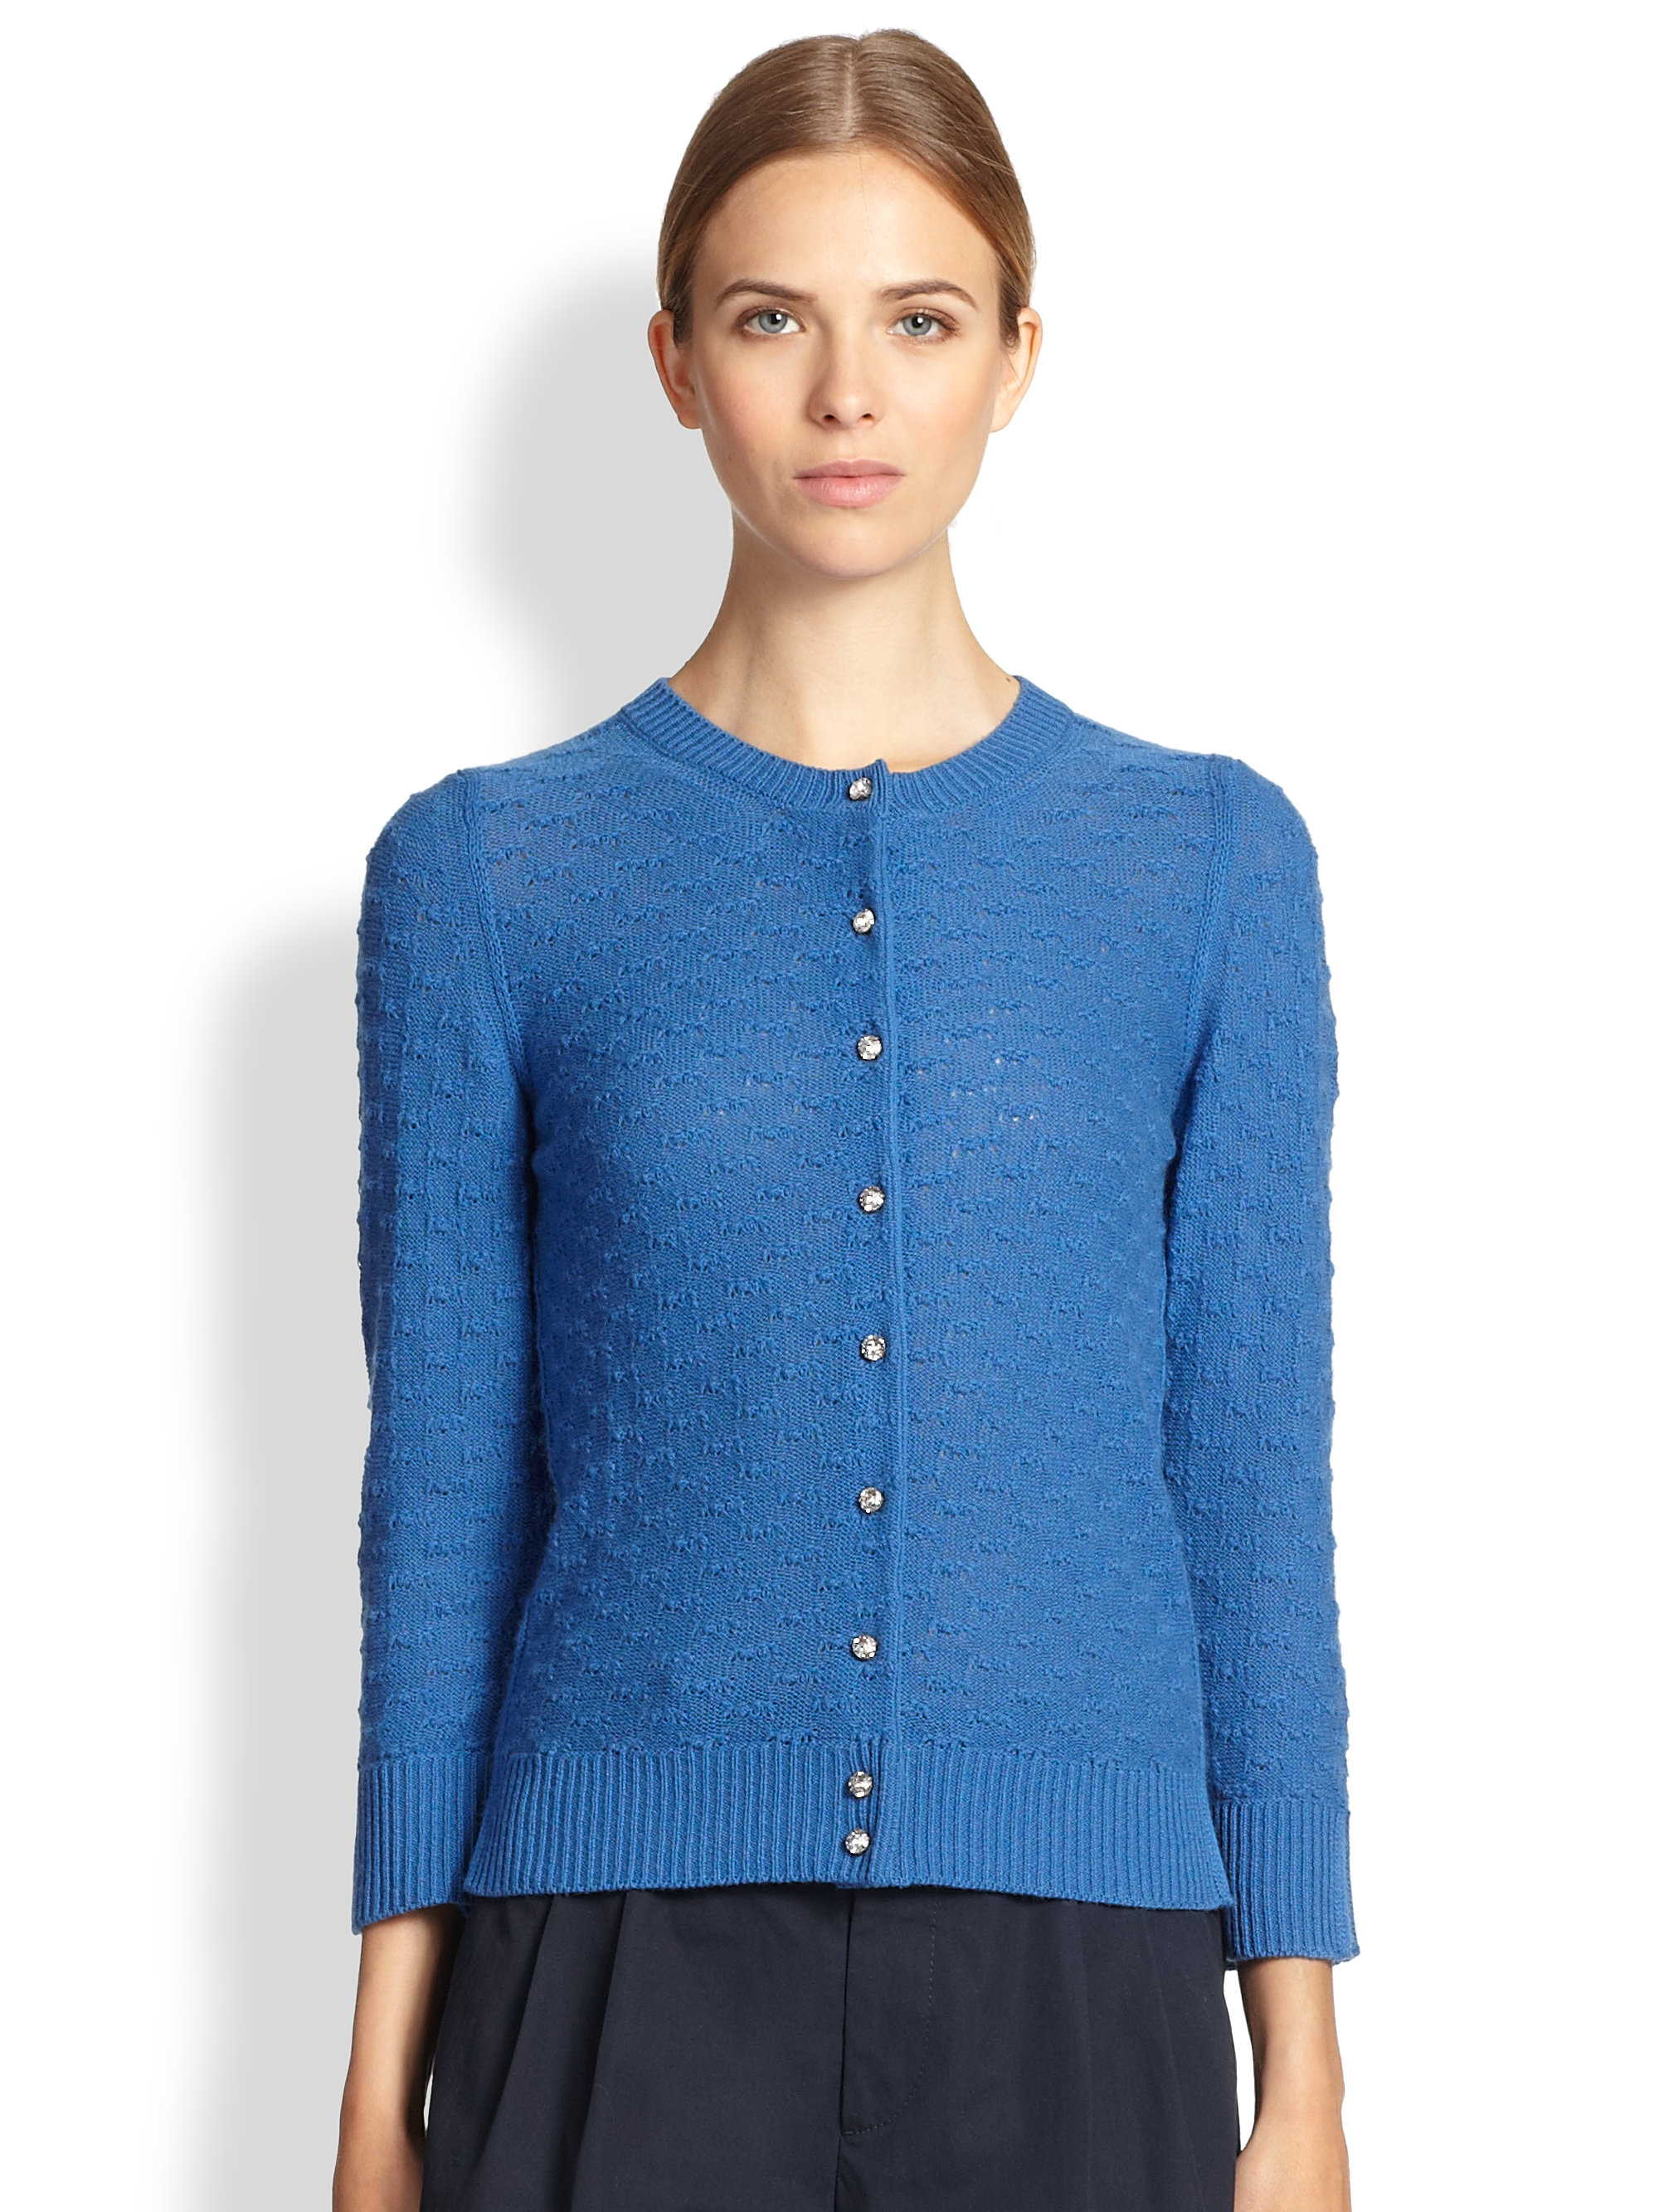 Lyst - Marc Jacobs Jeweled Cashmere Cardigan in Blue